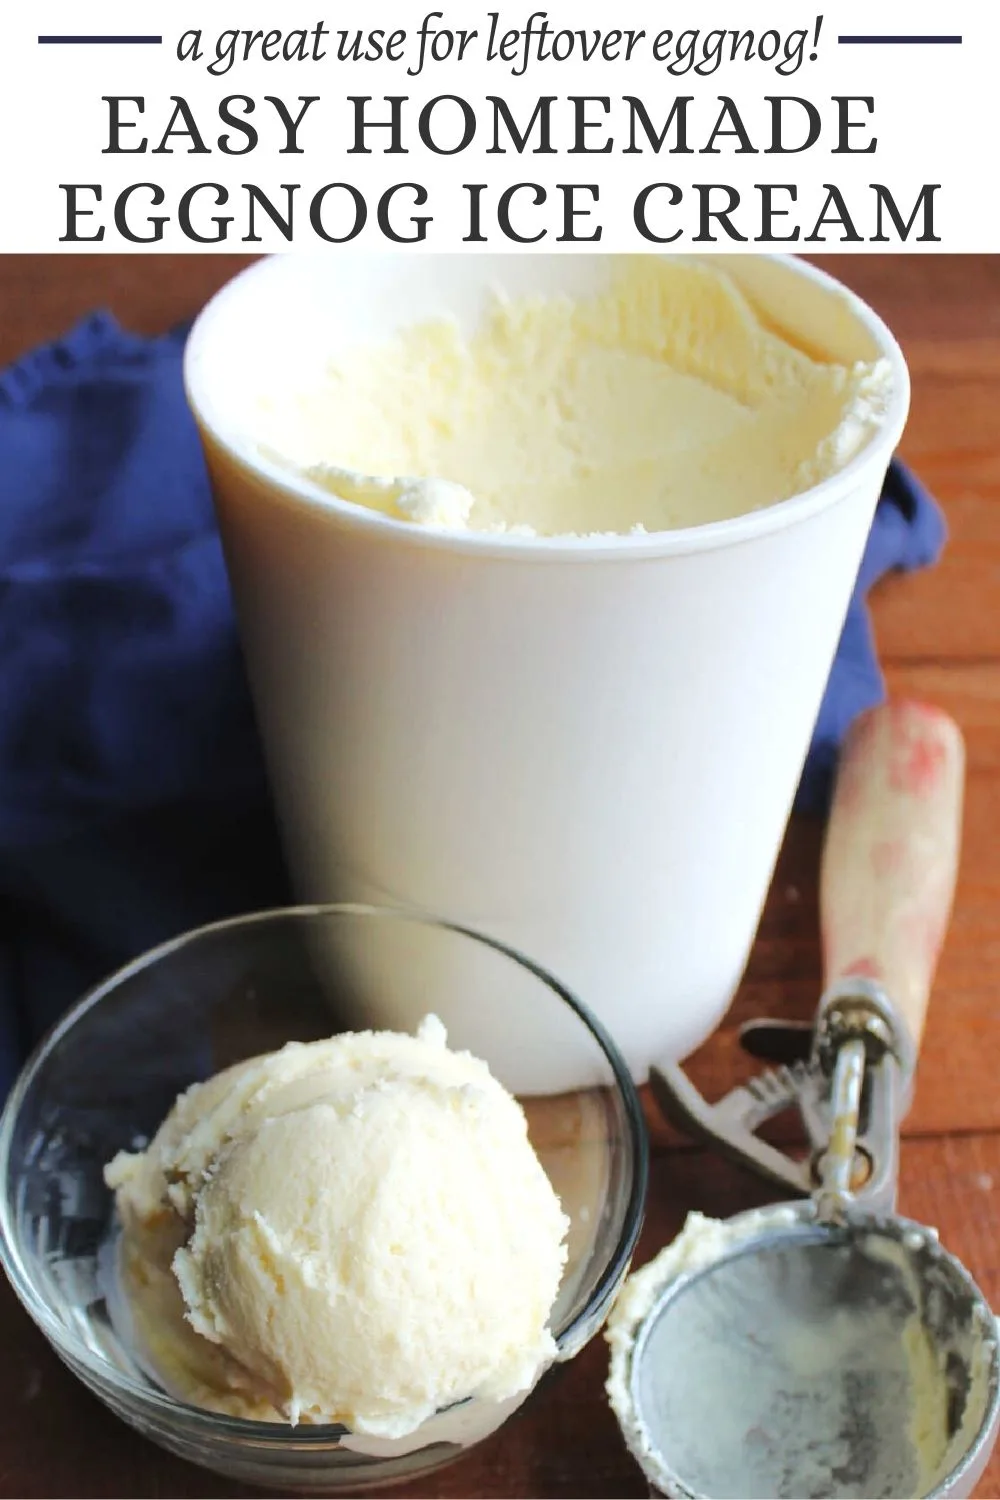 Turn extra eggnog into creamy homemade ice cream with this easy 5 ingredient eggnog ice cream recipe. It is the perfect way to enjoy the flavors of the season.